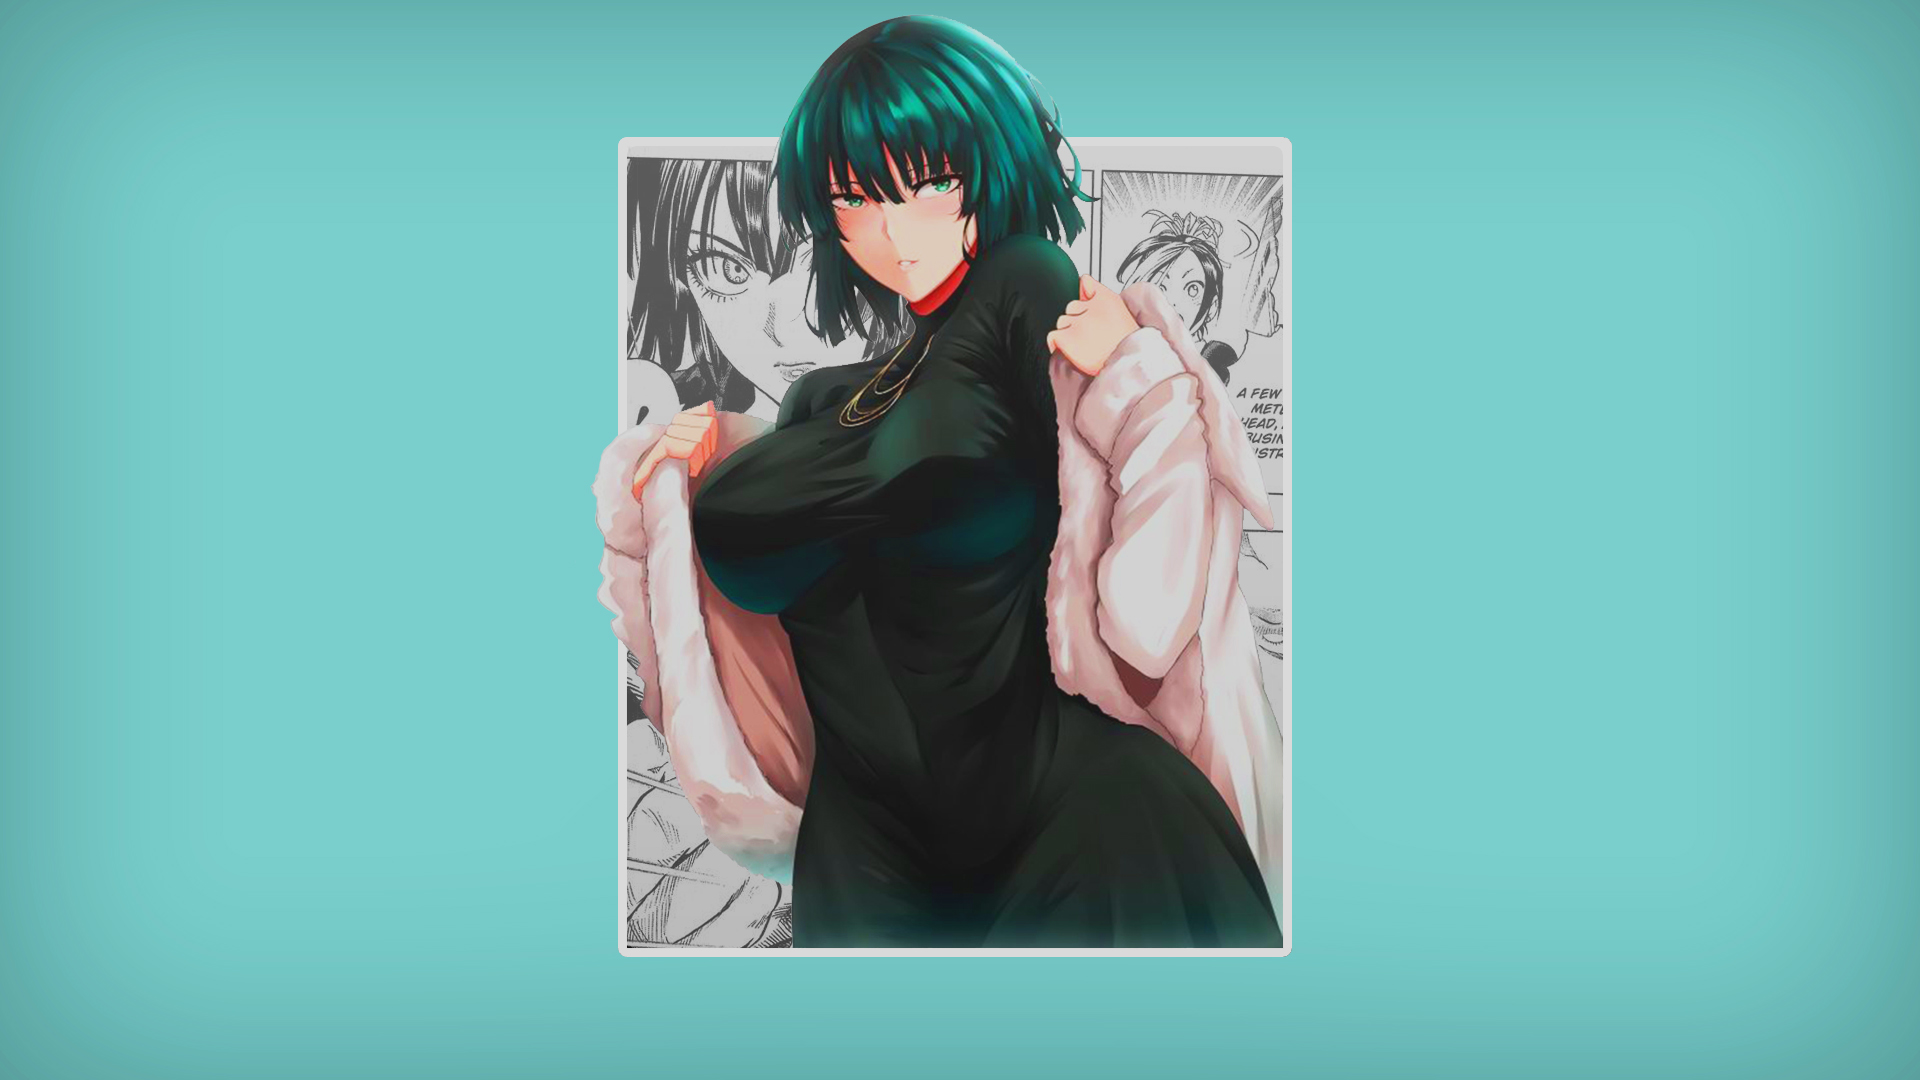 Anime 1920x1080 anime anime girls picture-in-picture simple background short hair green hair green eyes Fubuki One-Punch Man manga